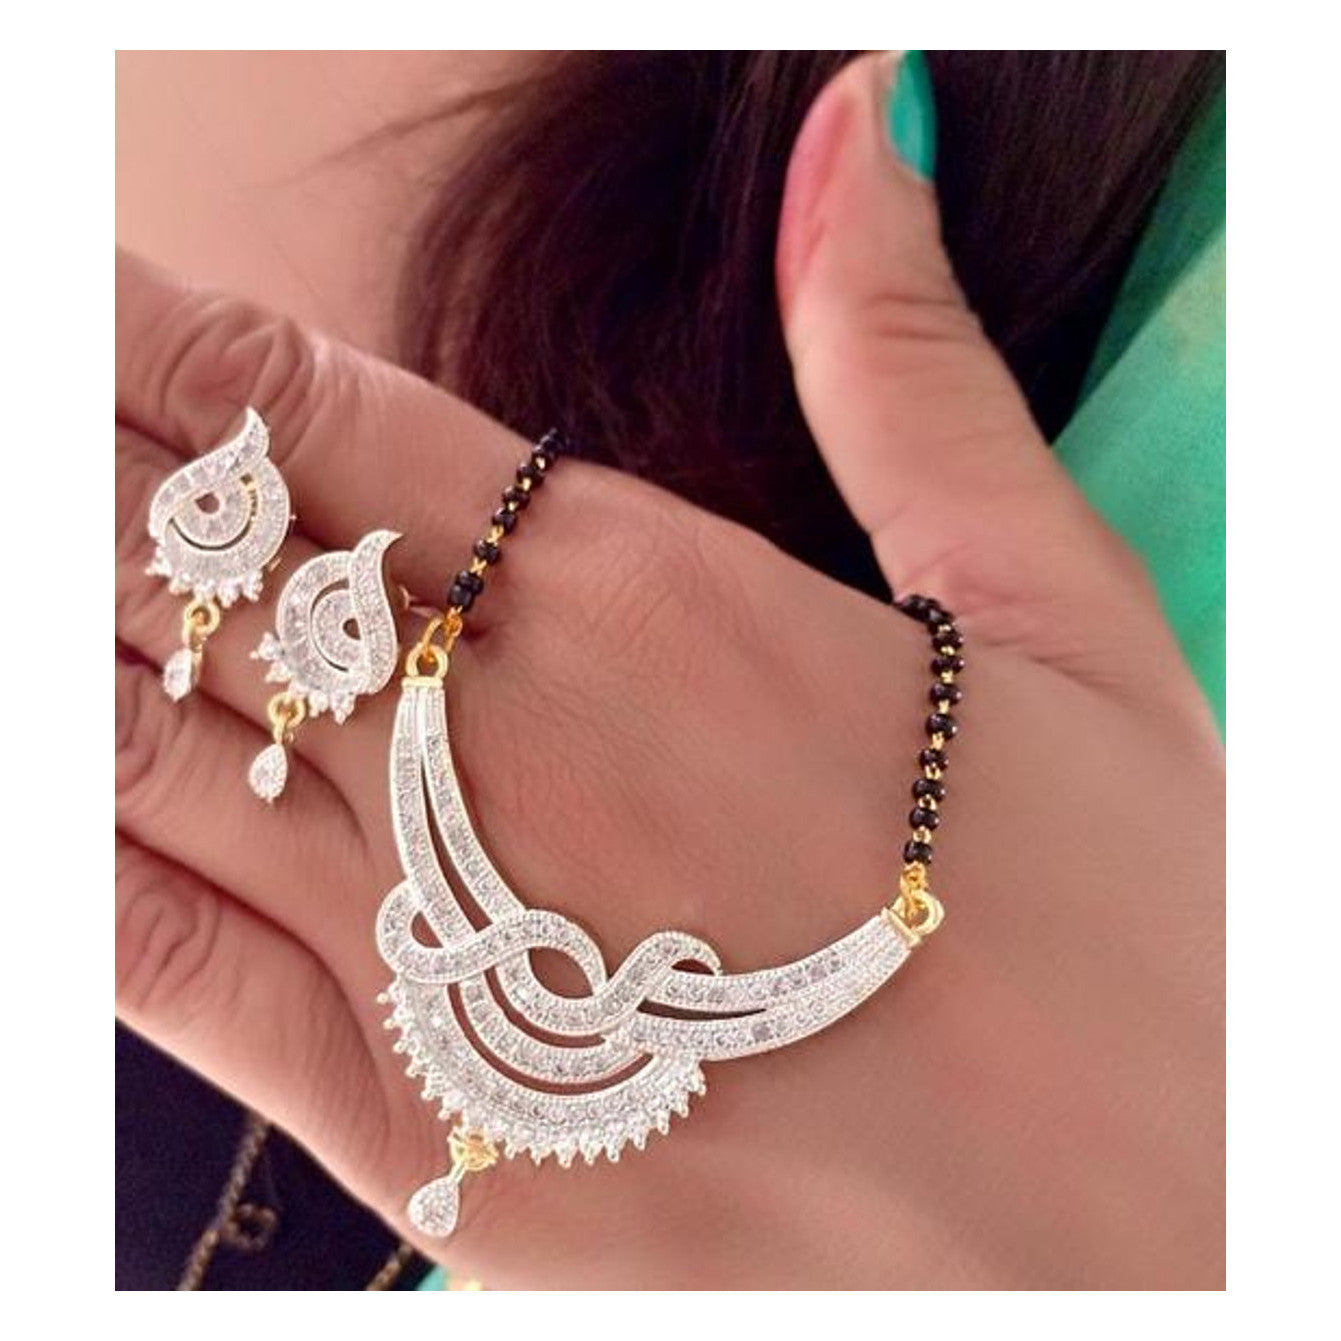 Best Traditional Handcrafted Designed by Mekkna of Mangalsutra with Earrings for Women. Now We can Book This Jewellery set online from Mekkna.